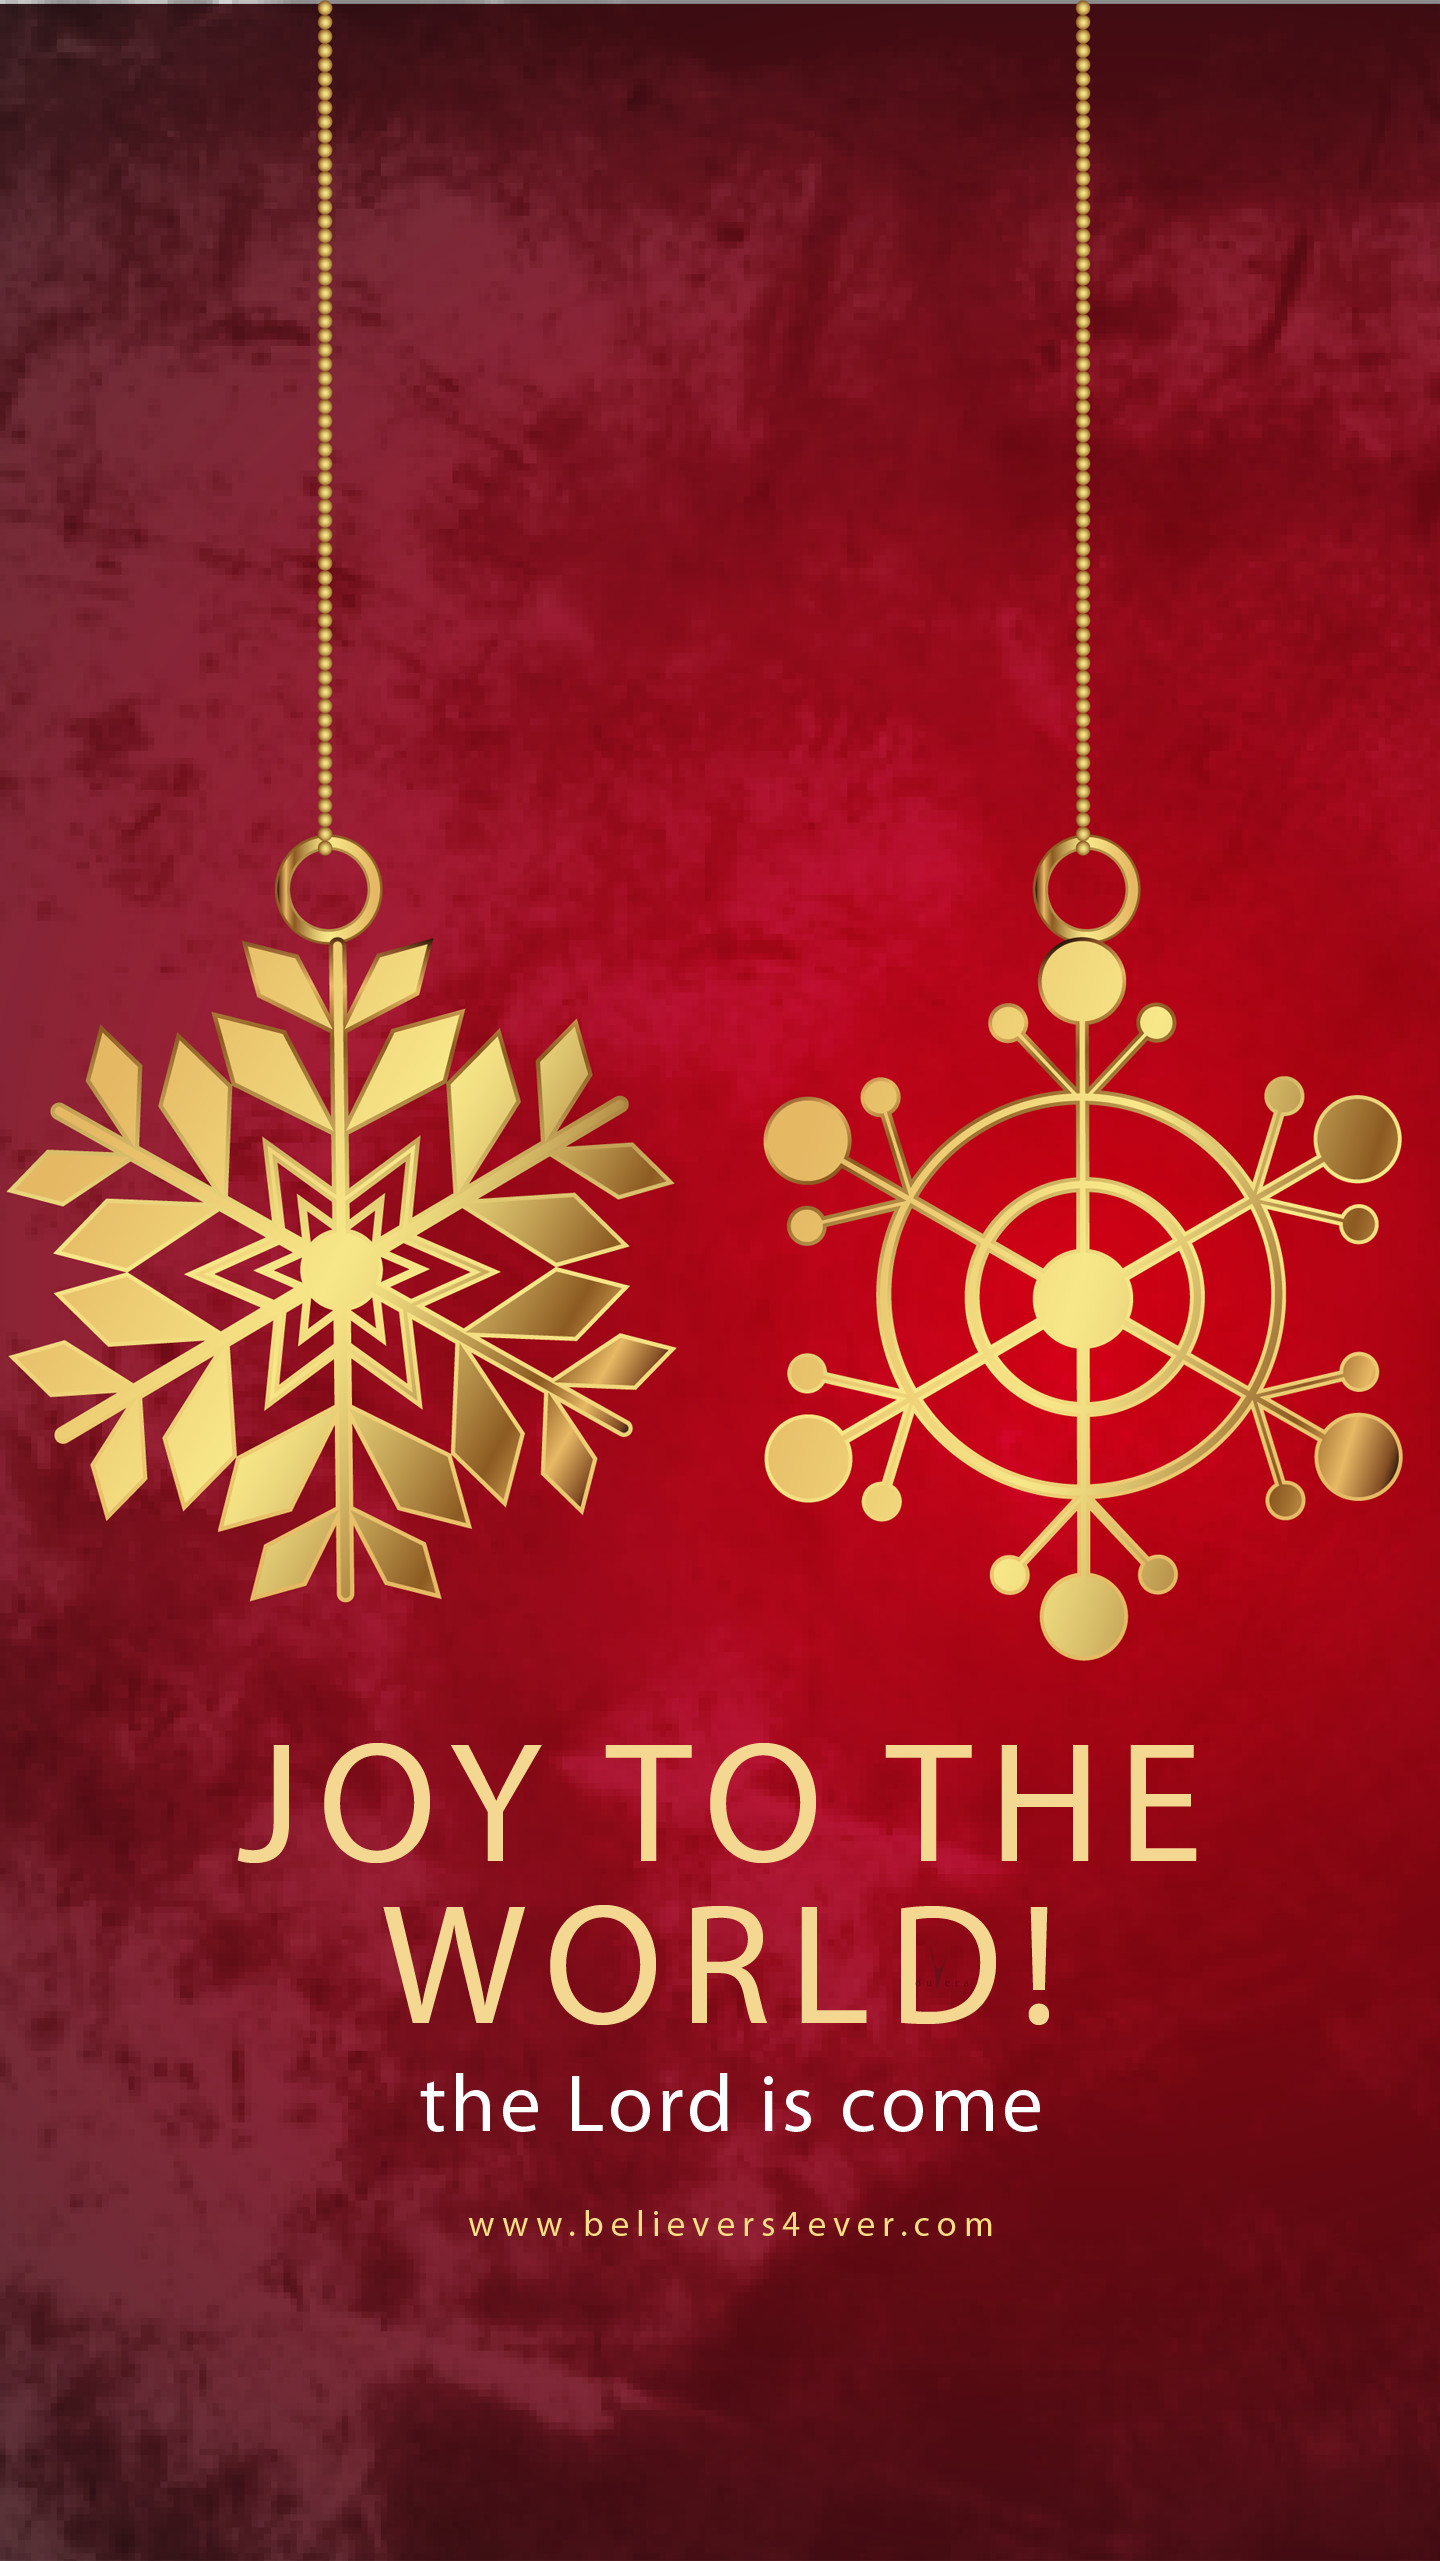 1440x2561 Joy to the world Christian Christmas mobile wallpaper for Android phones,  Iphone 6s, Iphone 6, Samsung Note 5, Samsung note 4, Samsung s6